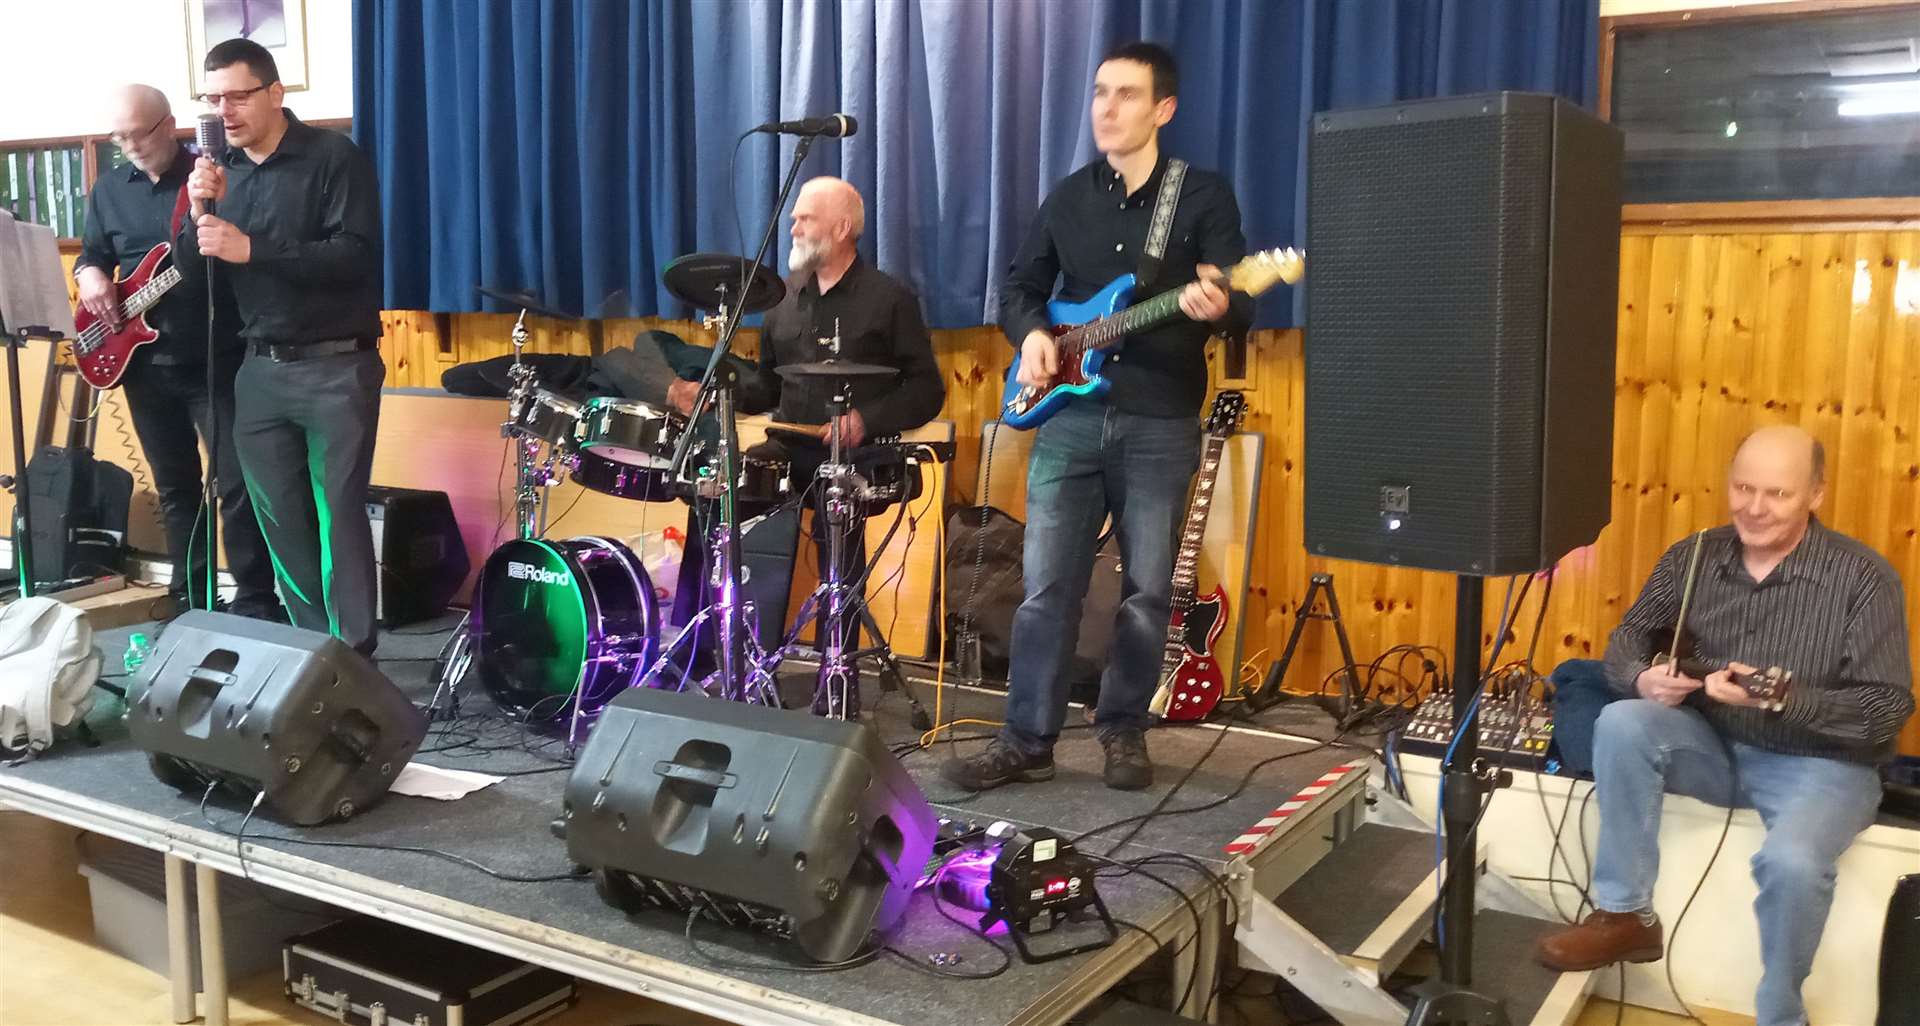 Doon Major on stage – (from left) Thomas Mackay, Aiden Steven, Jimmy Sutherland, Greg Thompson and Addie Harper.